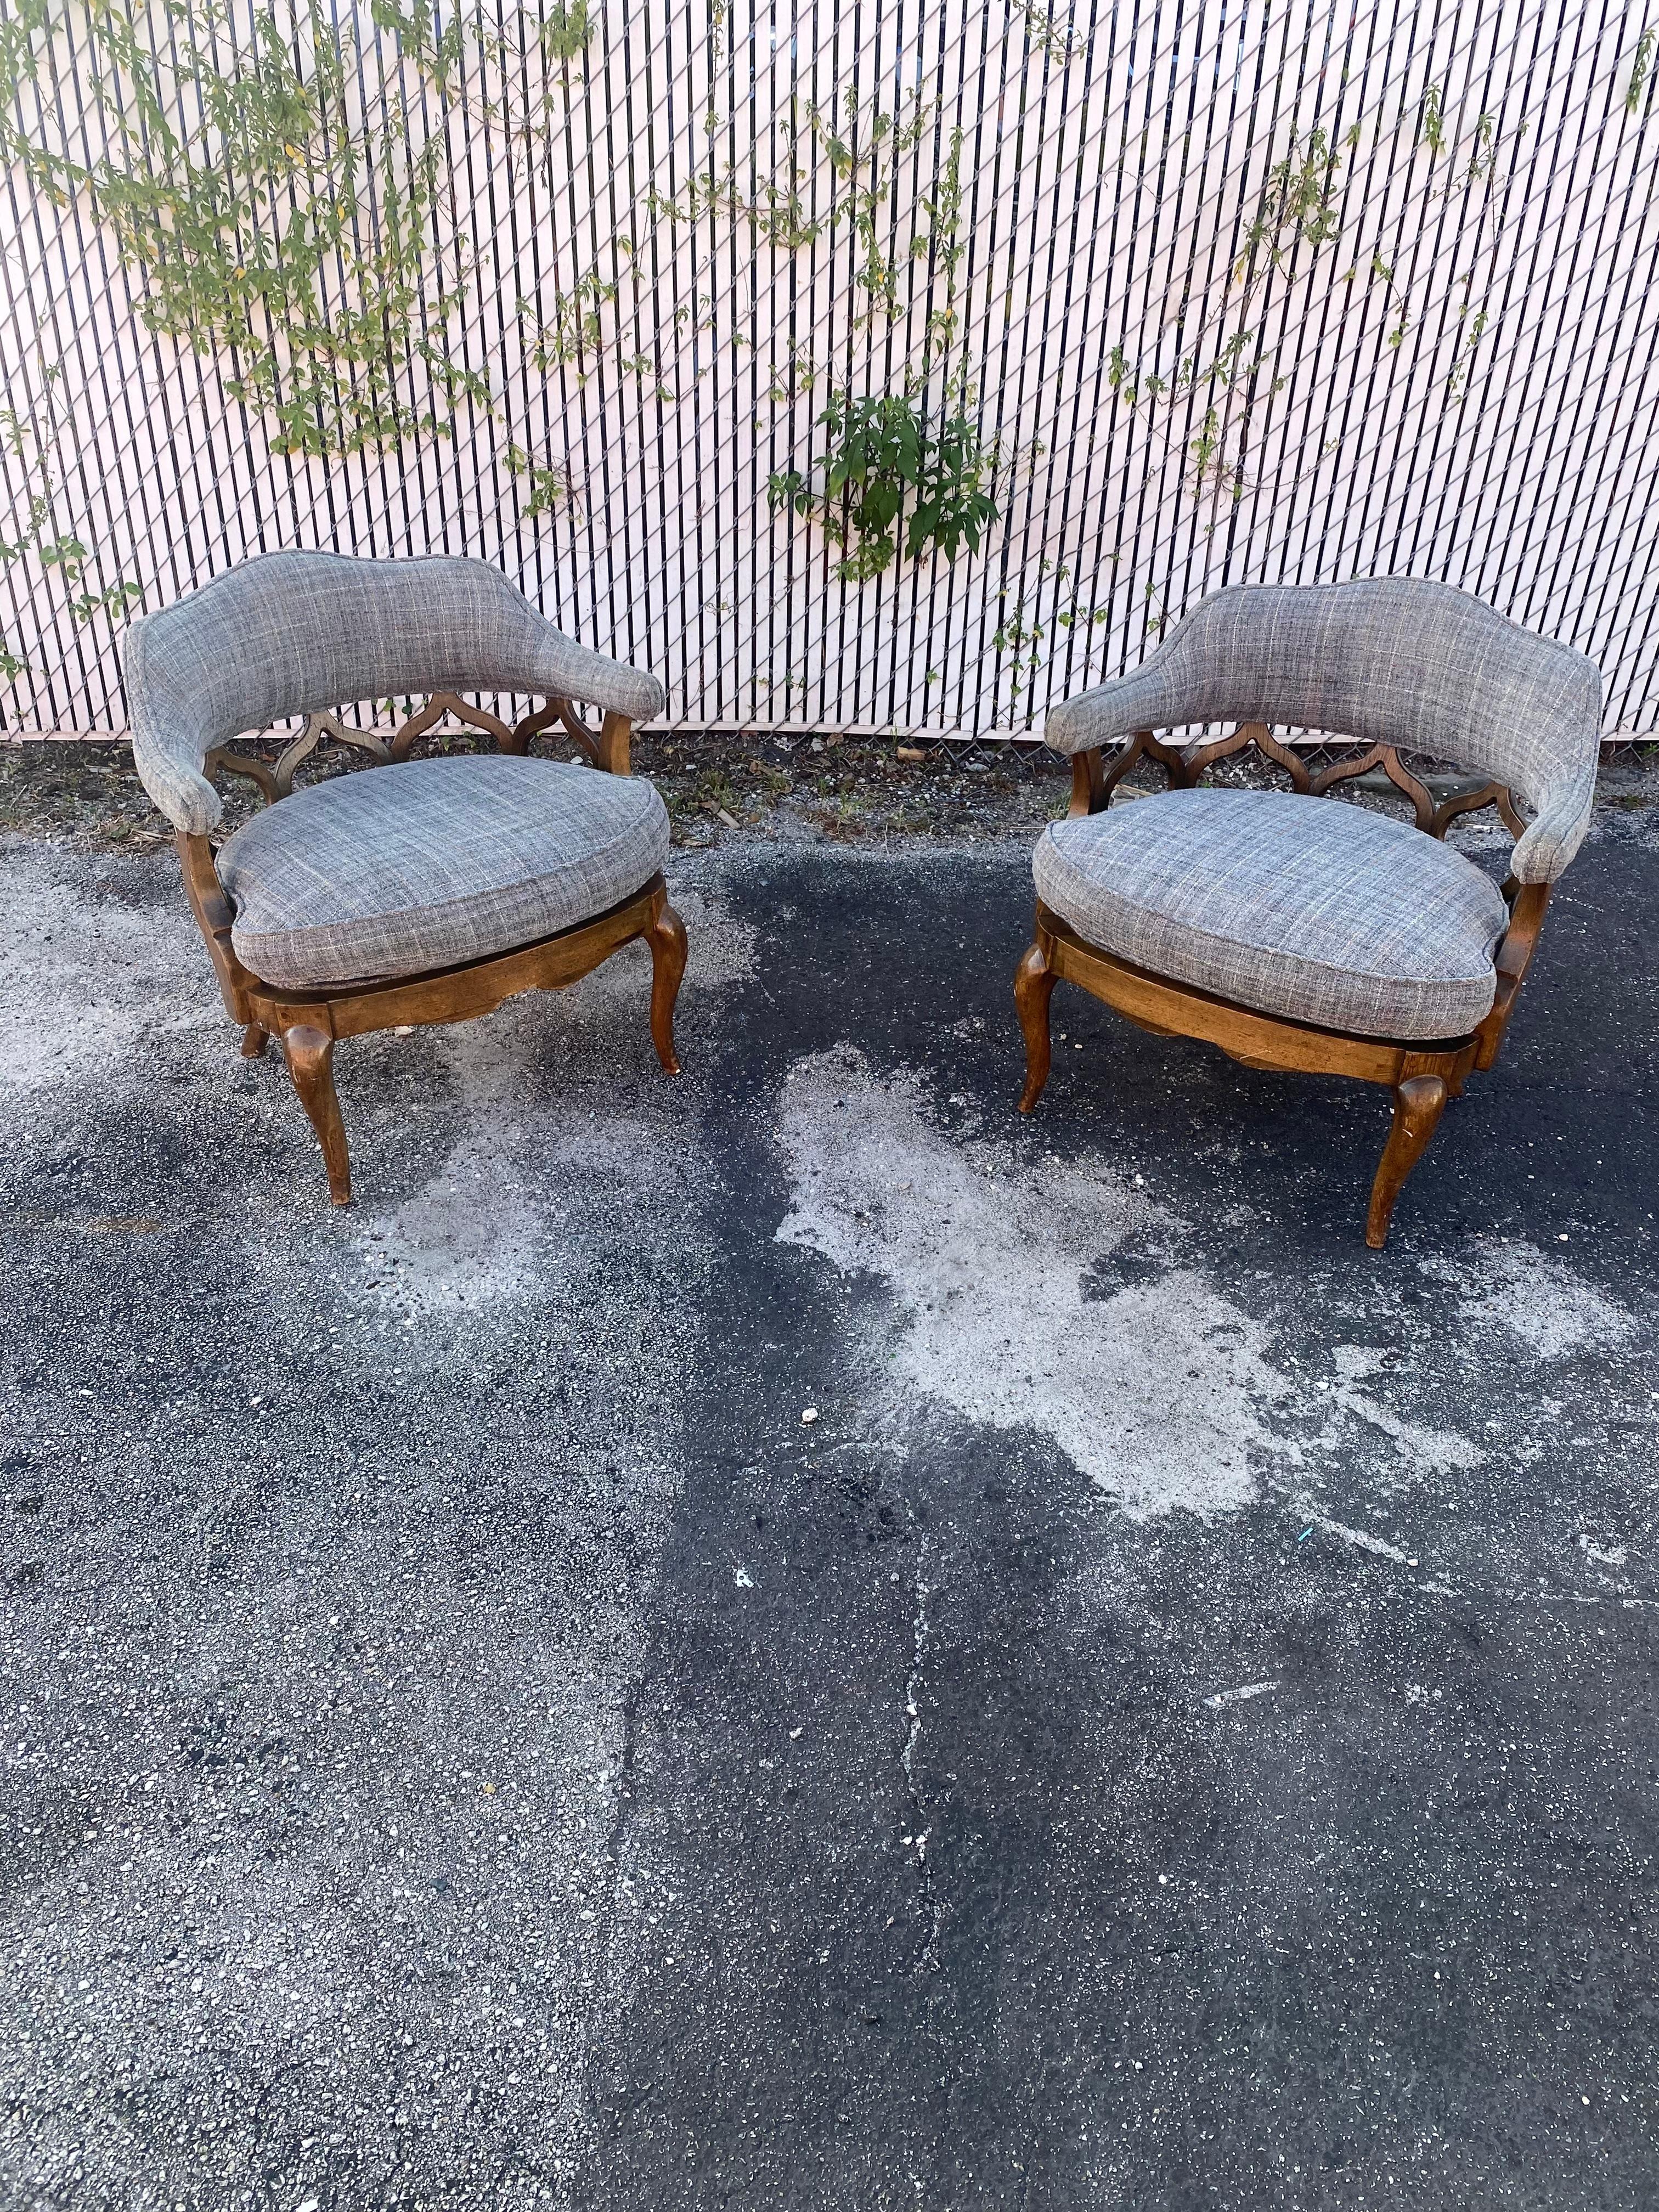 1970s  Mid Century Sculptural Curved Barrel Tweed Wood Chairs, Set of 2 For Sale 2